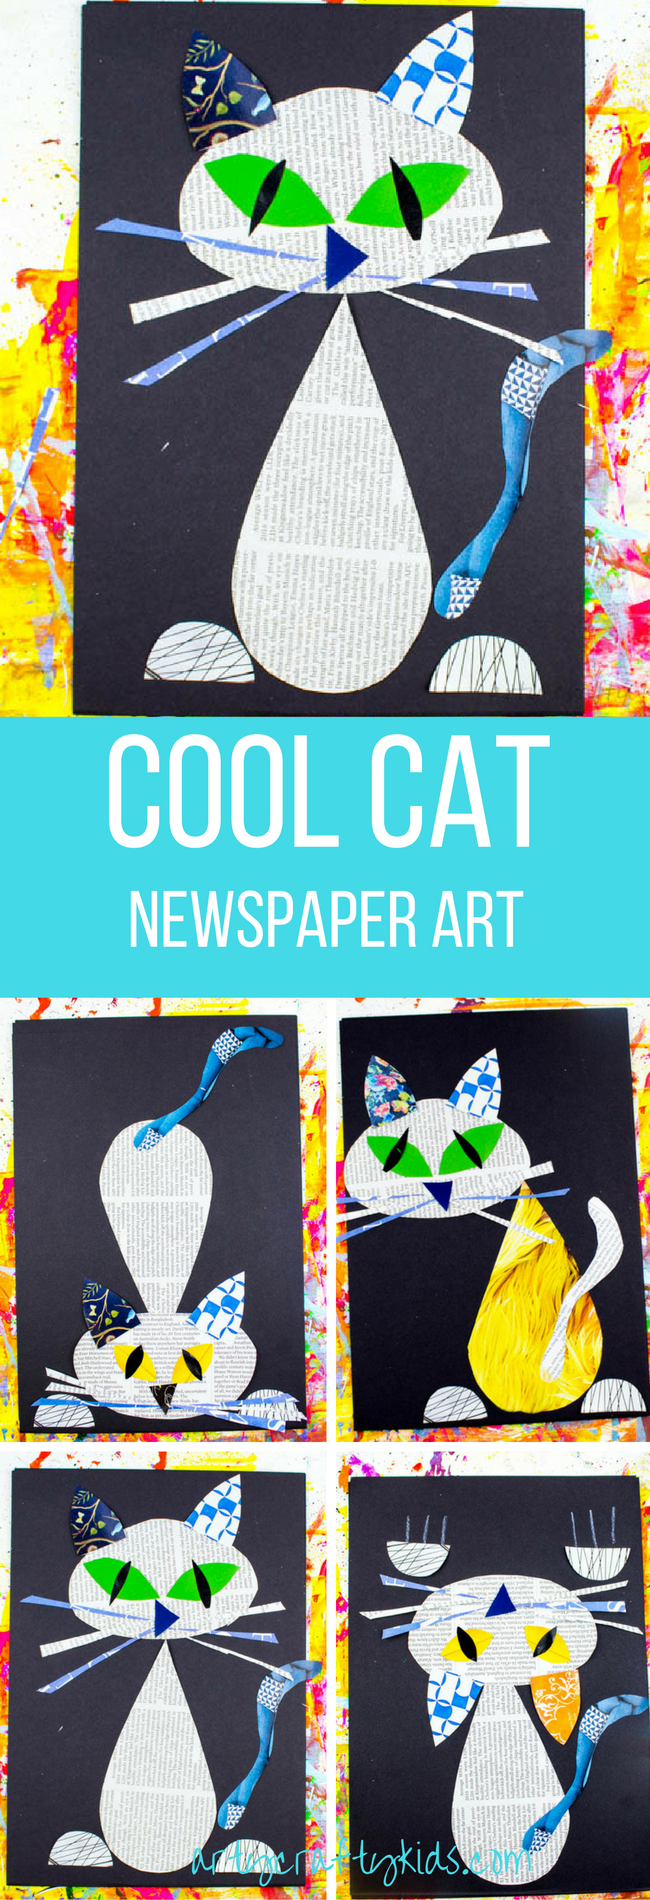 Arty Crafty Kids | Art | Cool Cat Newspaper Art for Kids | A fun recycled cat art project using recycled newspaper and magazines.